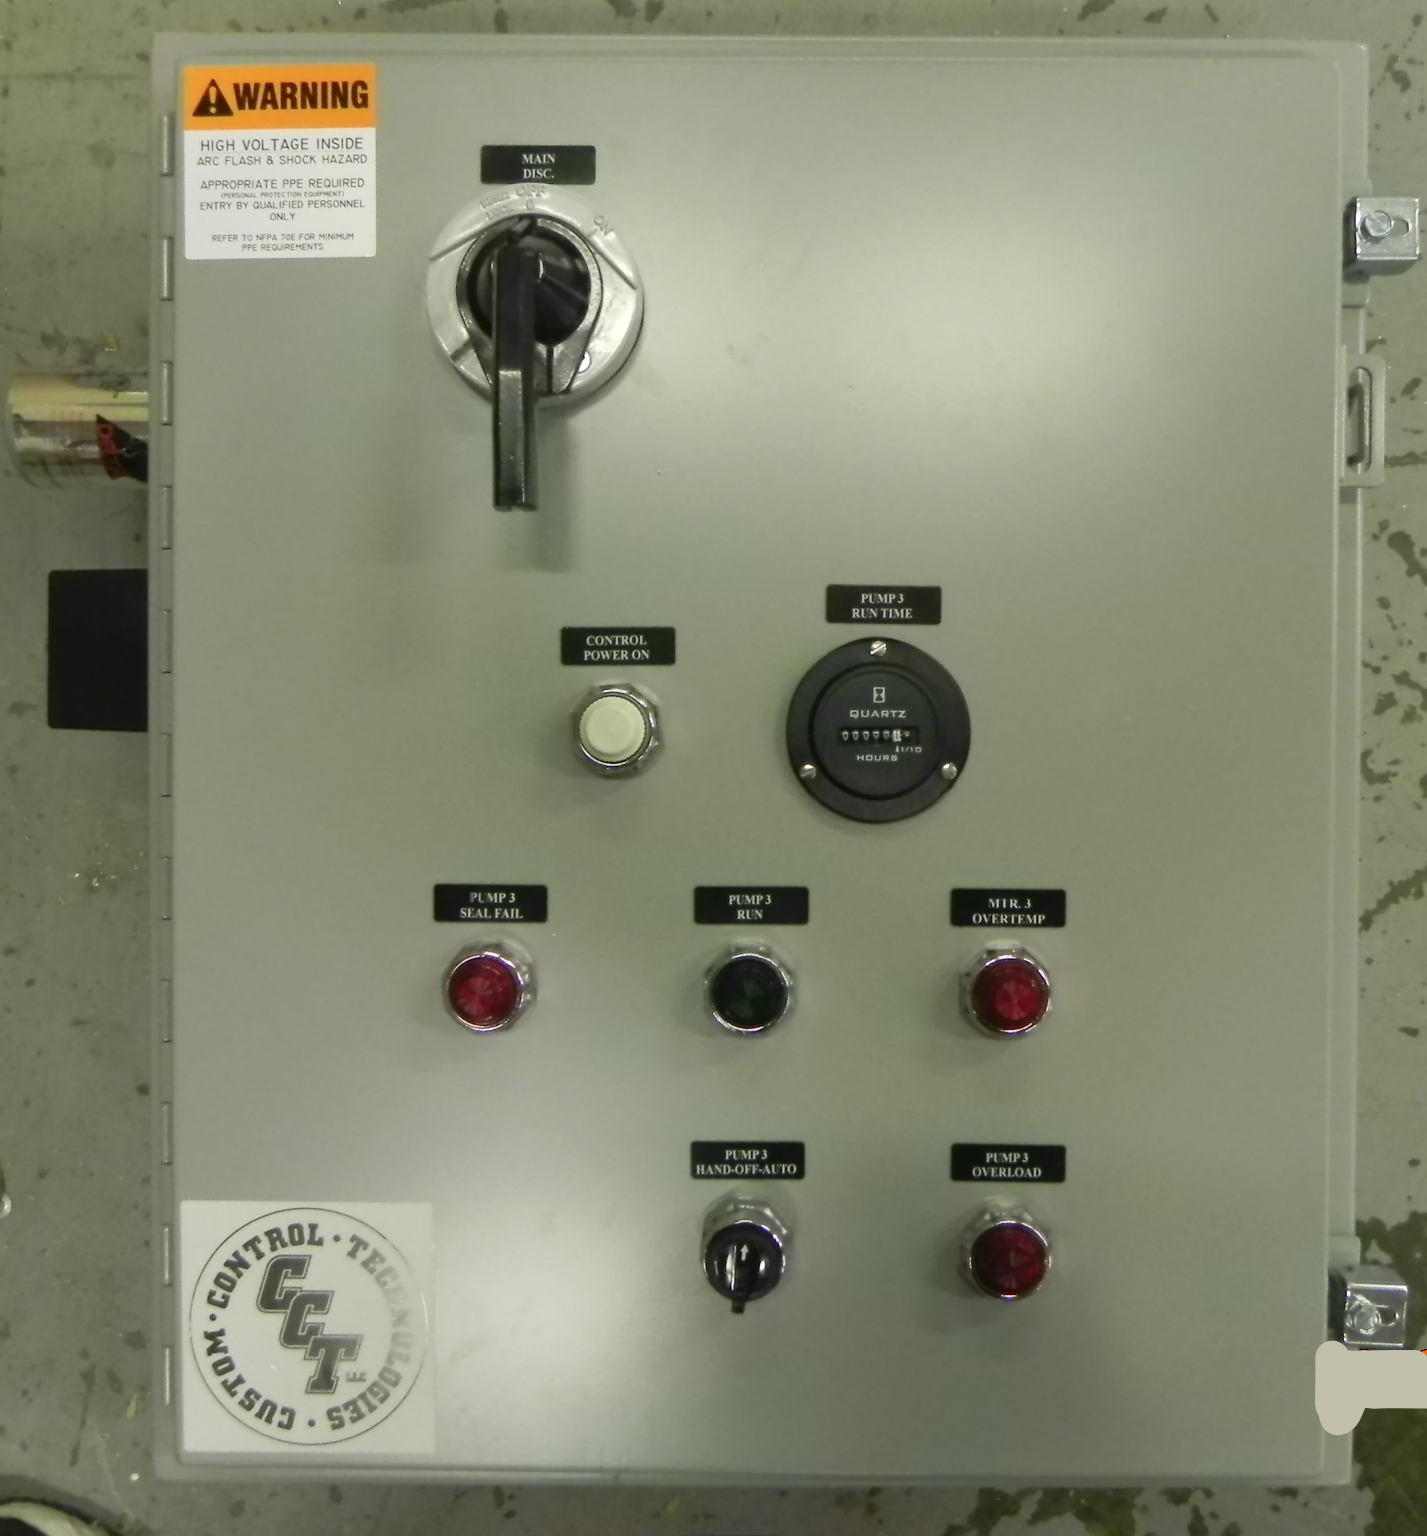 Power Stream VDST (VARIABLE) Control Panel - Disruptor Manufacturing